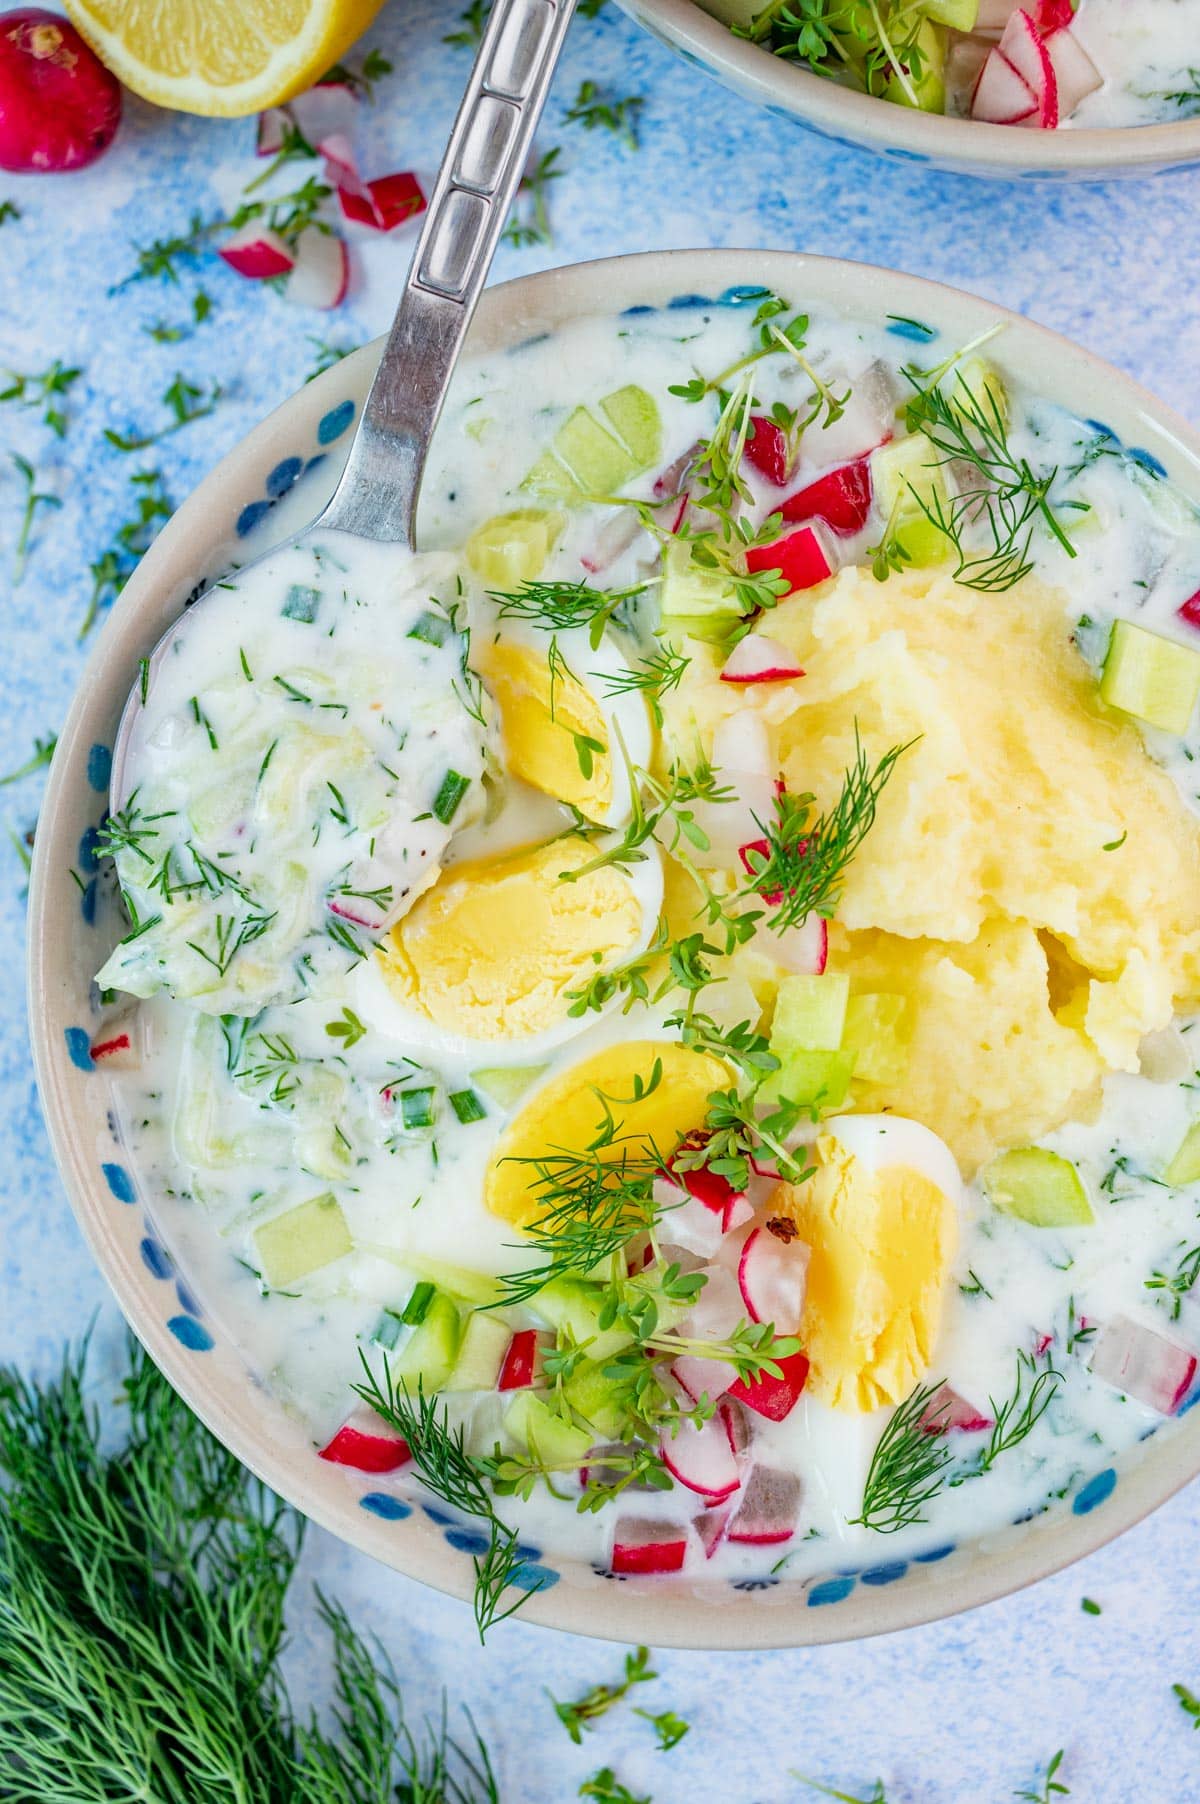 Chlodnik ogorkowy soup in a white bowl topped with eggs, mashed potatoes, radishes, and dill.